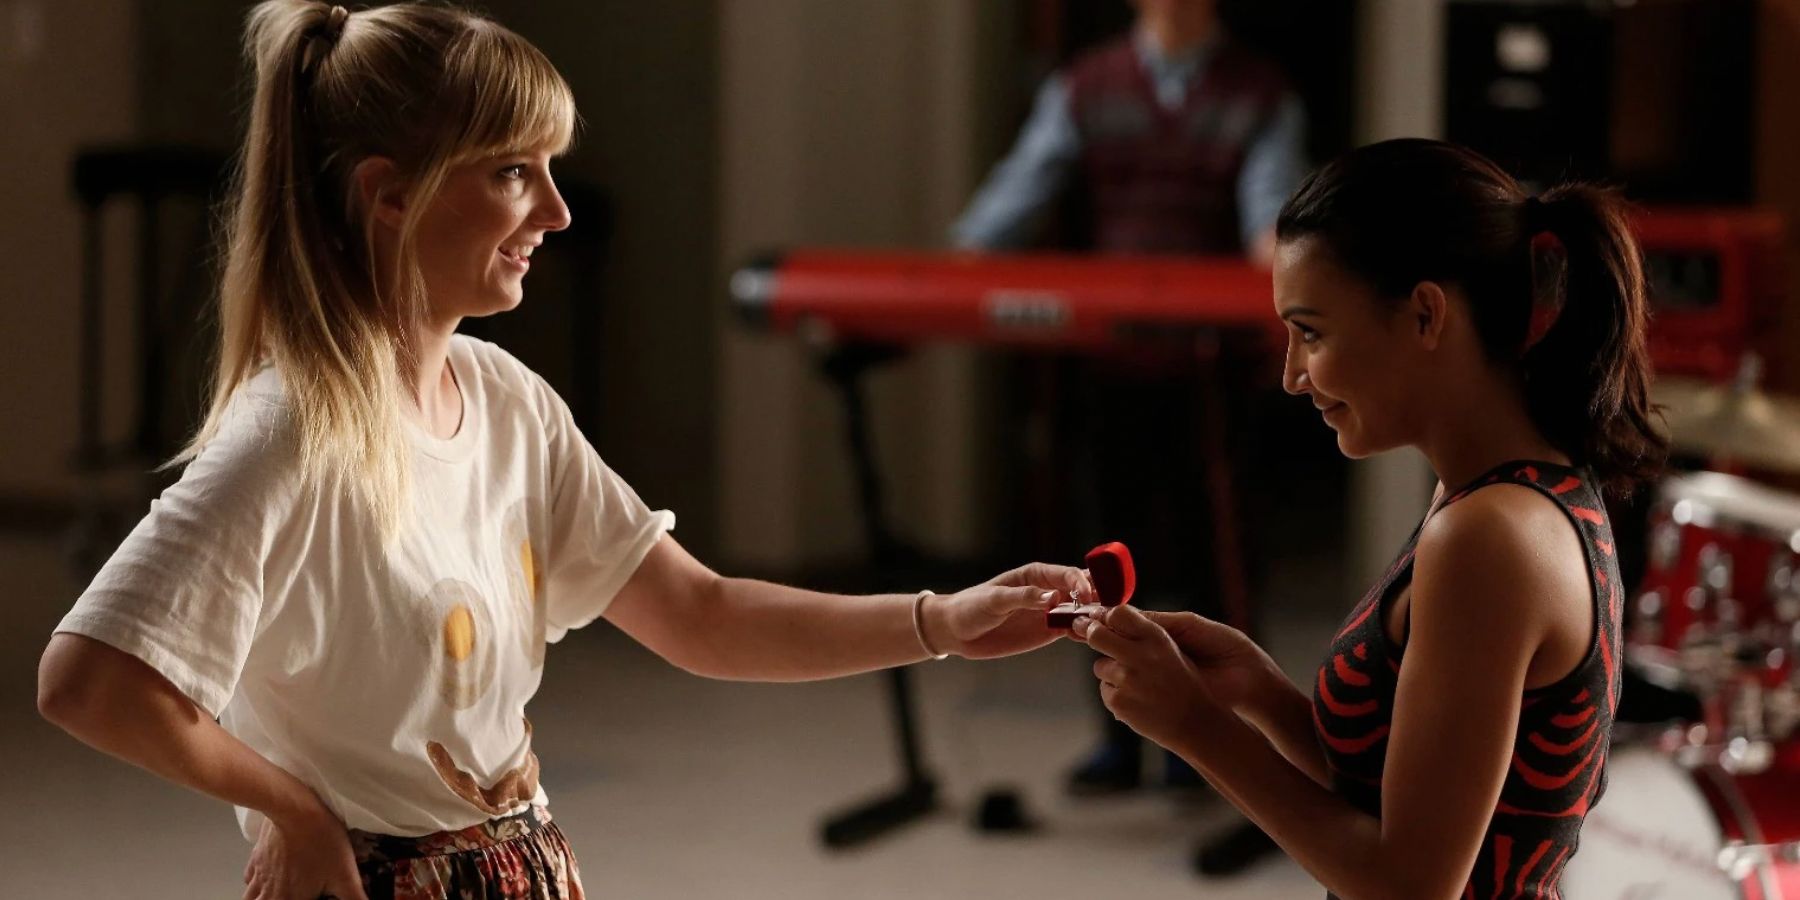 Brittany takes her engagement ring from Santana in Glee